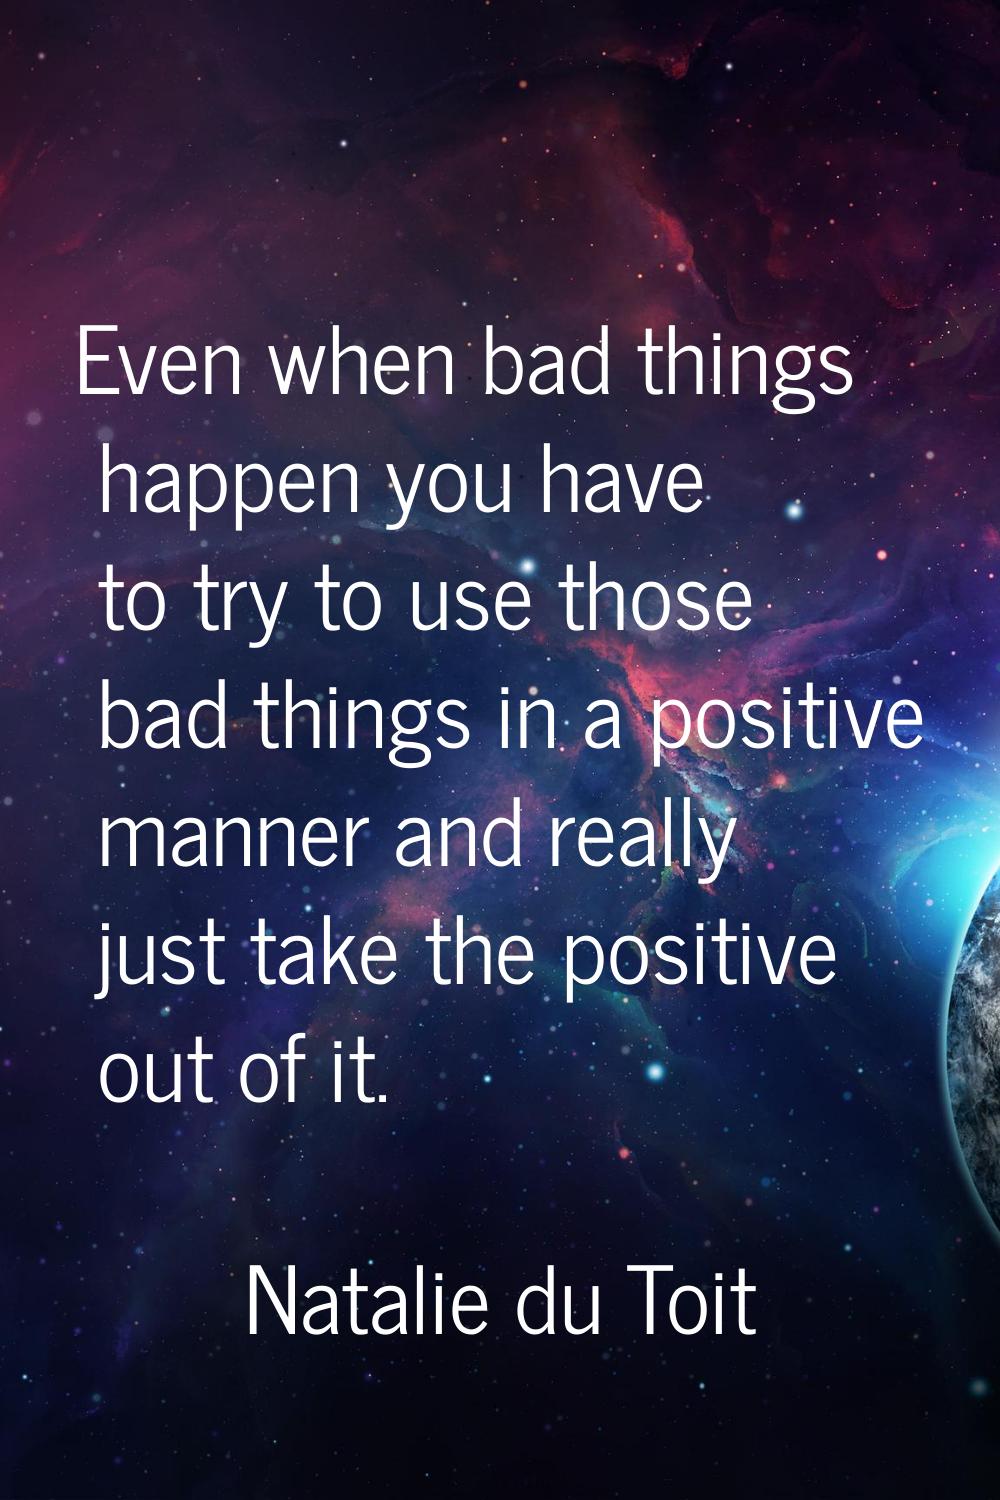 Even when bad things happen you have to try to use those bad things in a positive manner and really